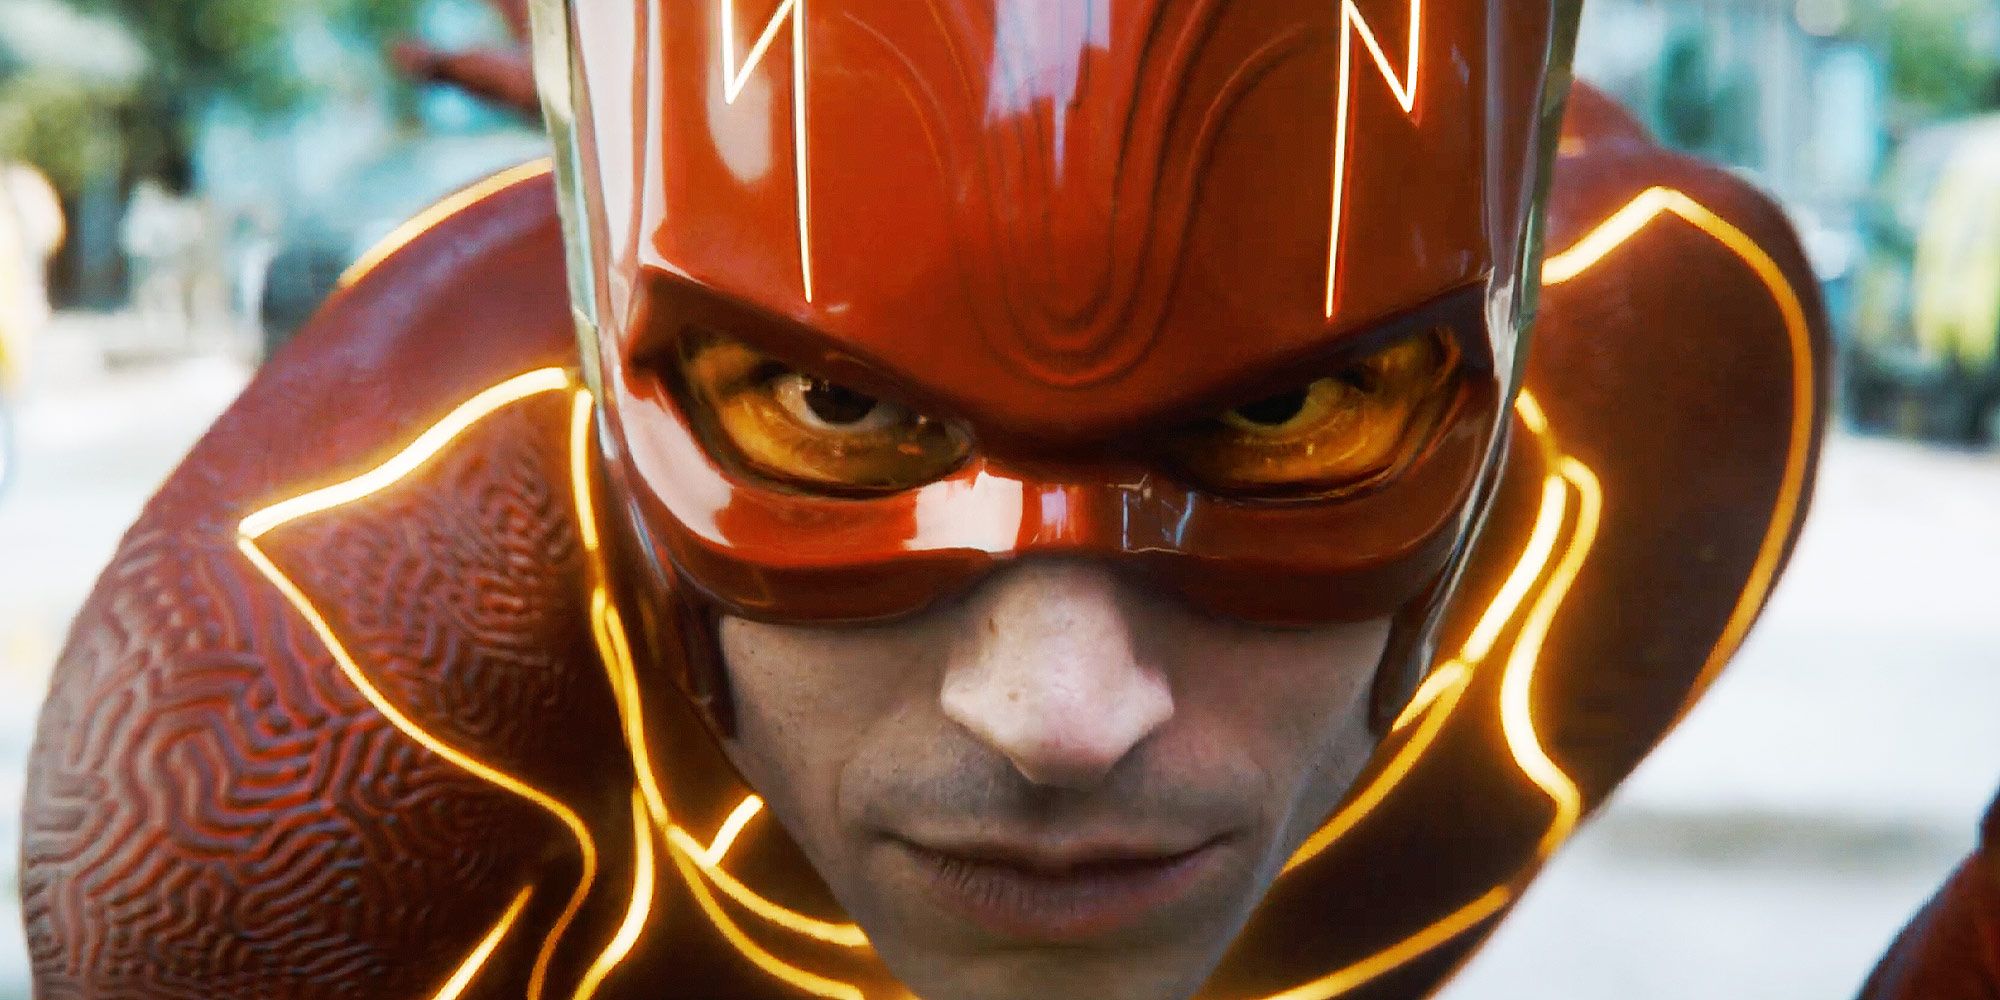 A close-up of the Flash running